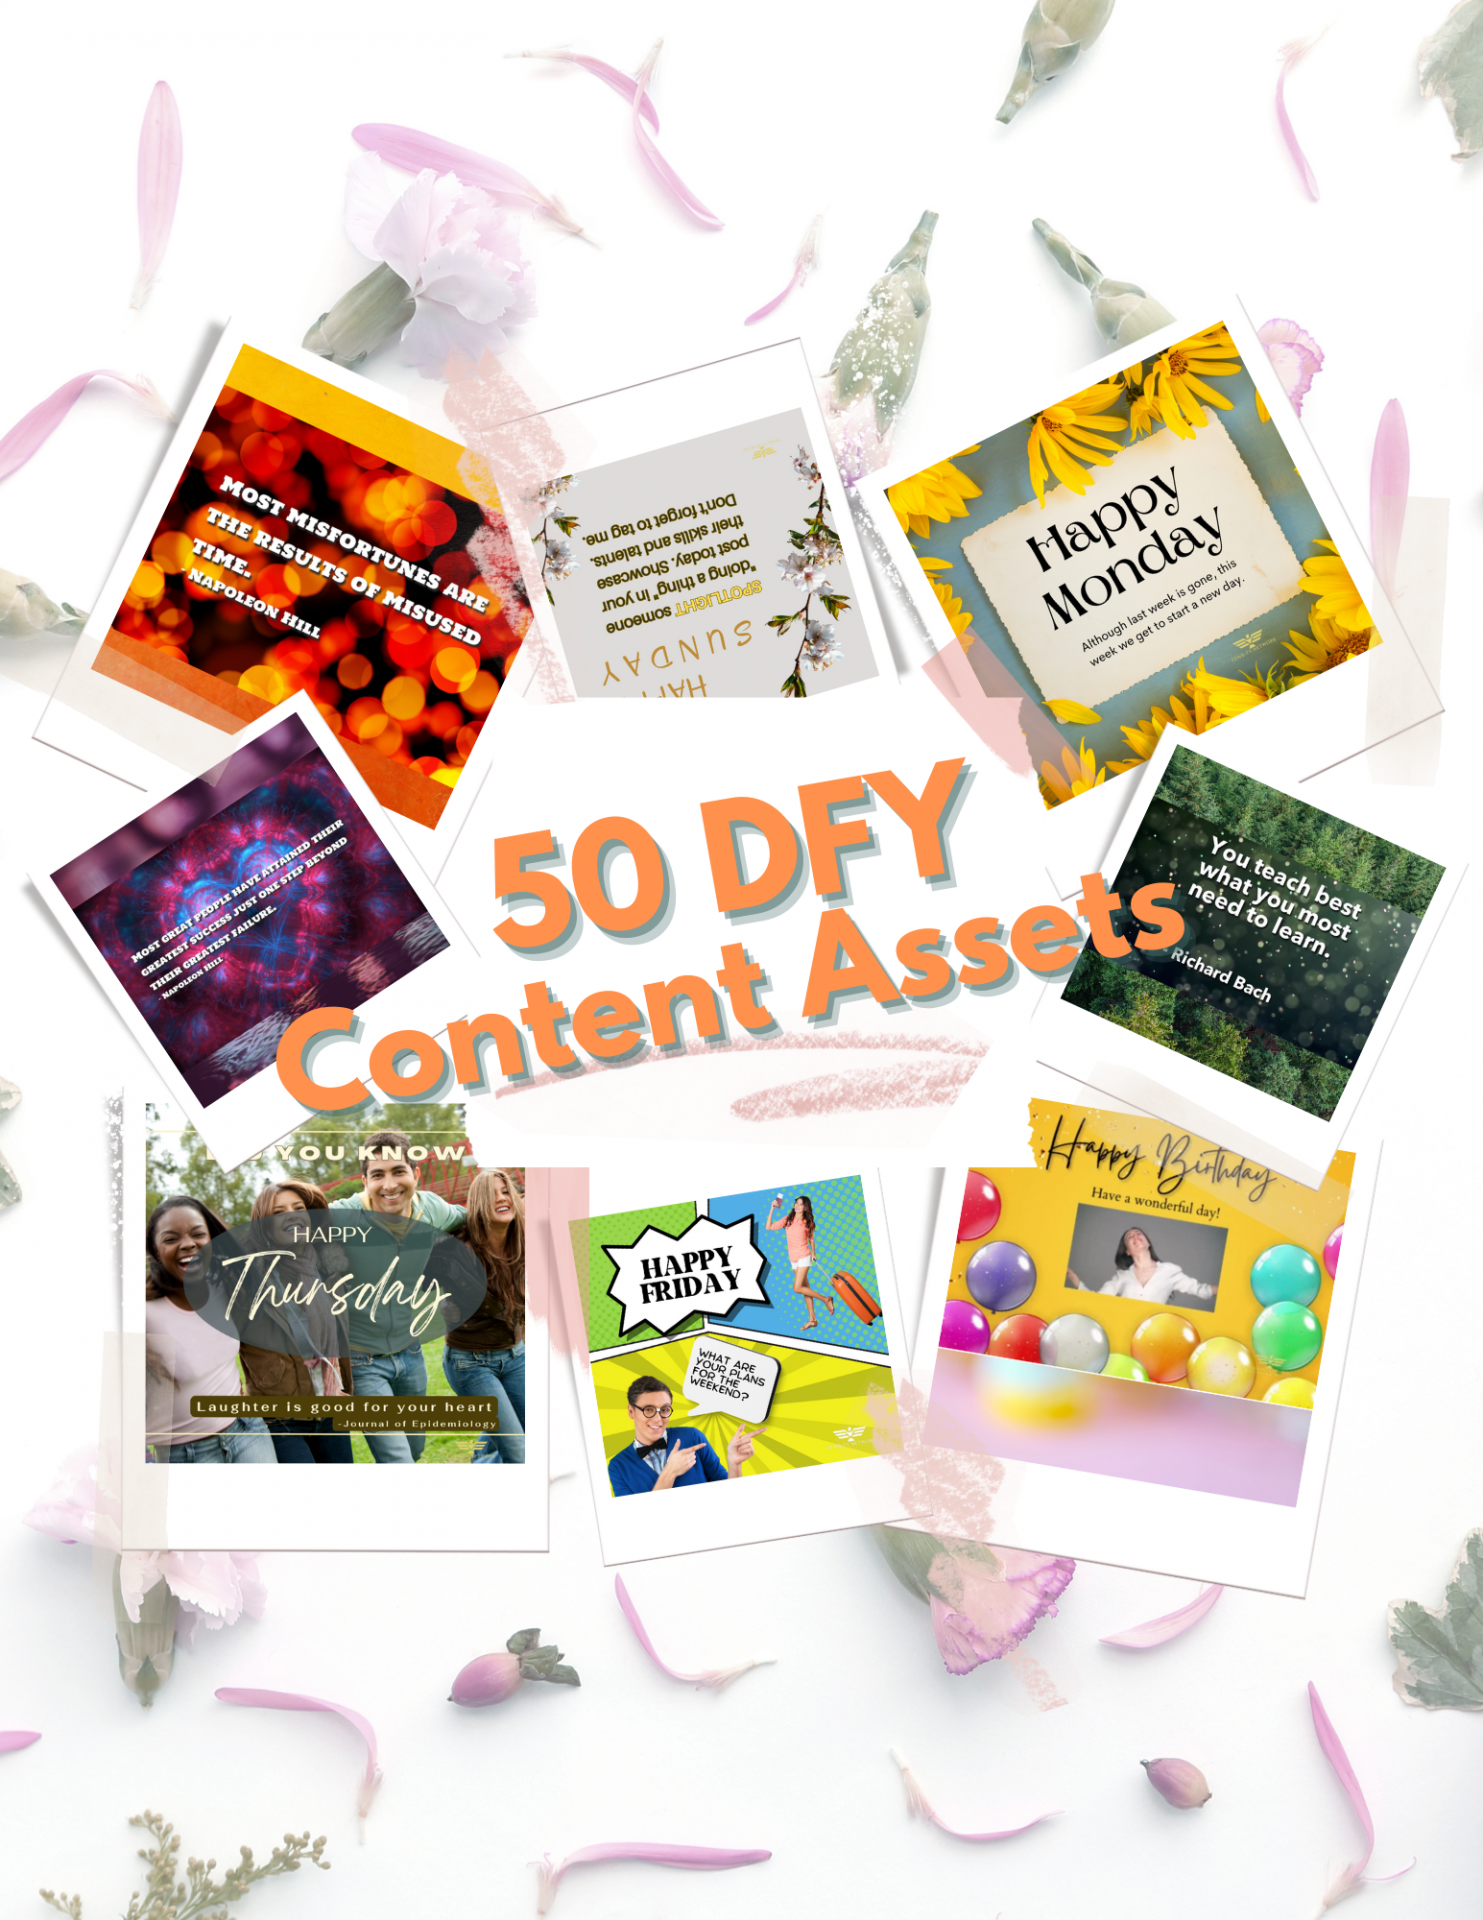 50 dfy content assets ad 8 5 11 in